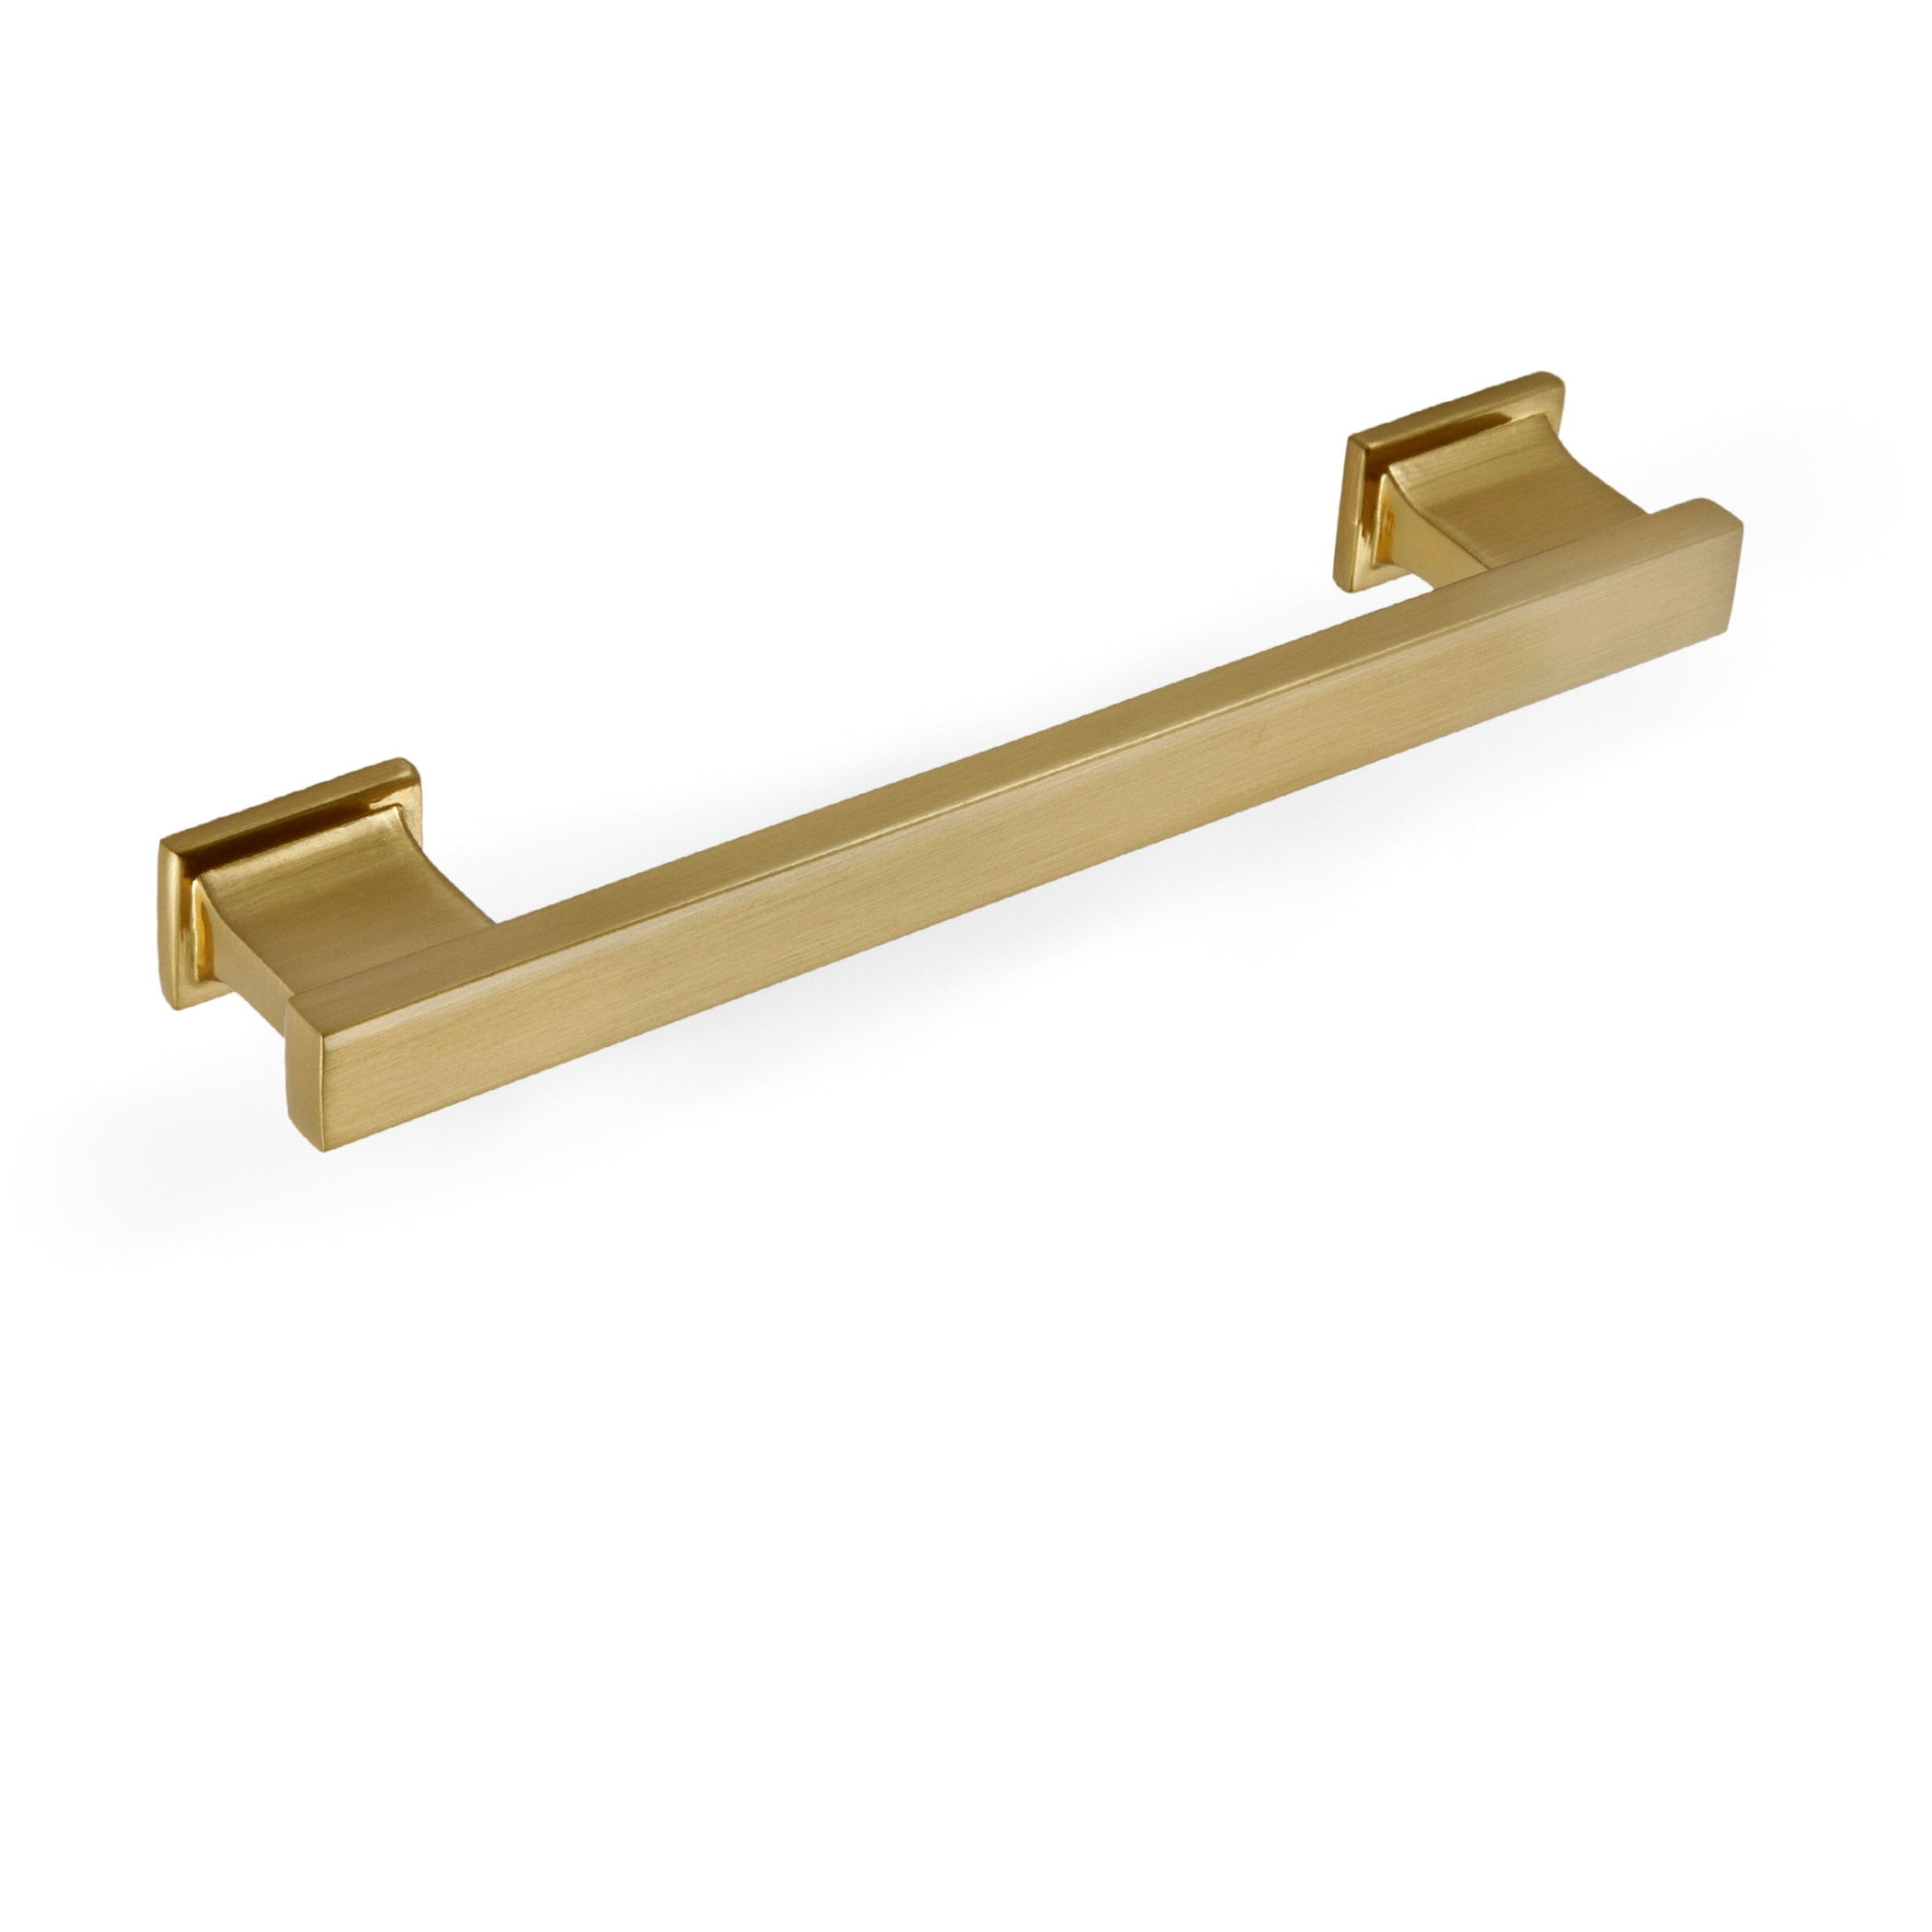 Trends in Hardware: Why I LOVE Satin Brass - The Hardware Hut